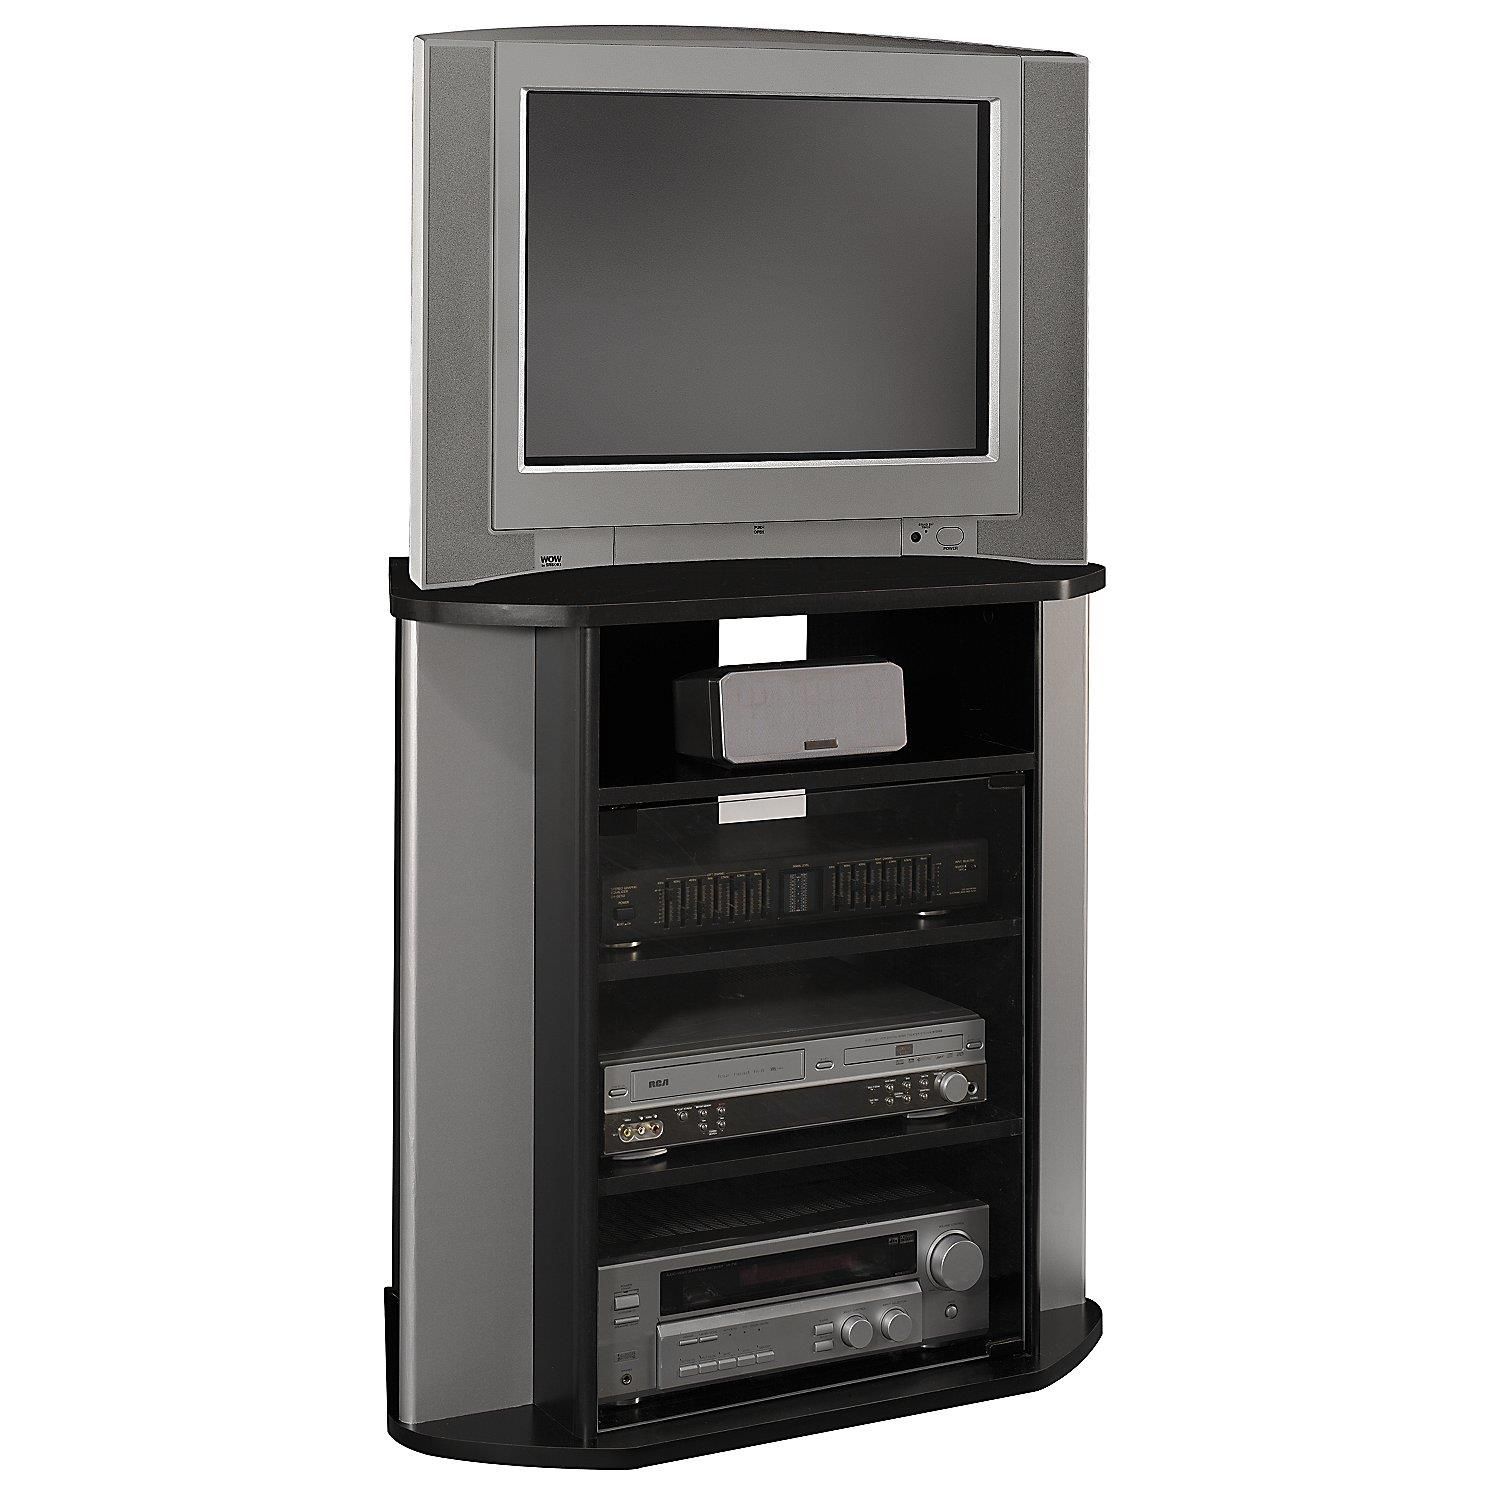 Tall Corner Tv Stand | Ojcommerce With Narrow Tv Stands For Flat Screens (View 9 of 15)